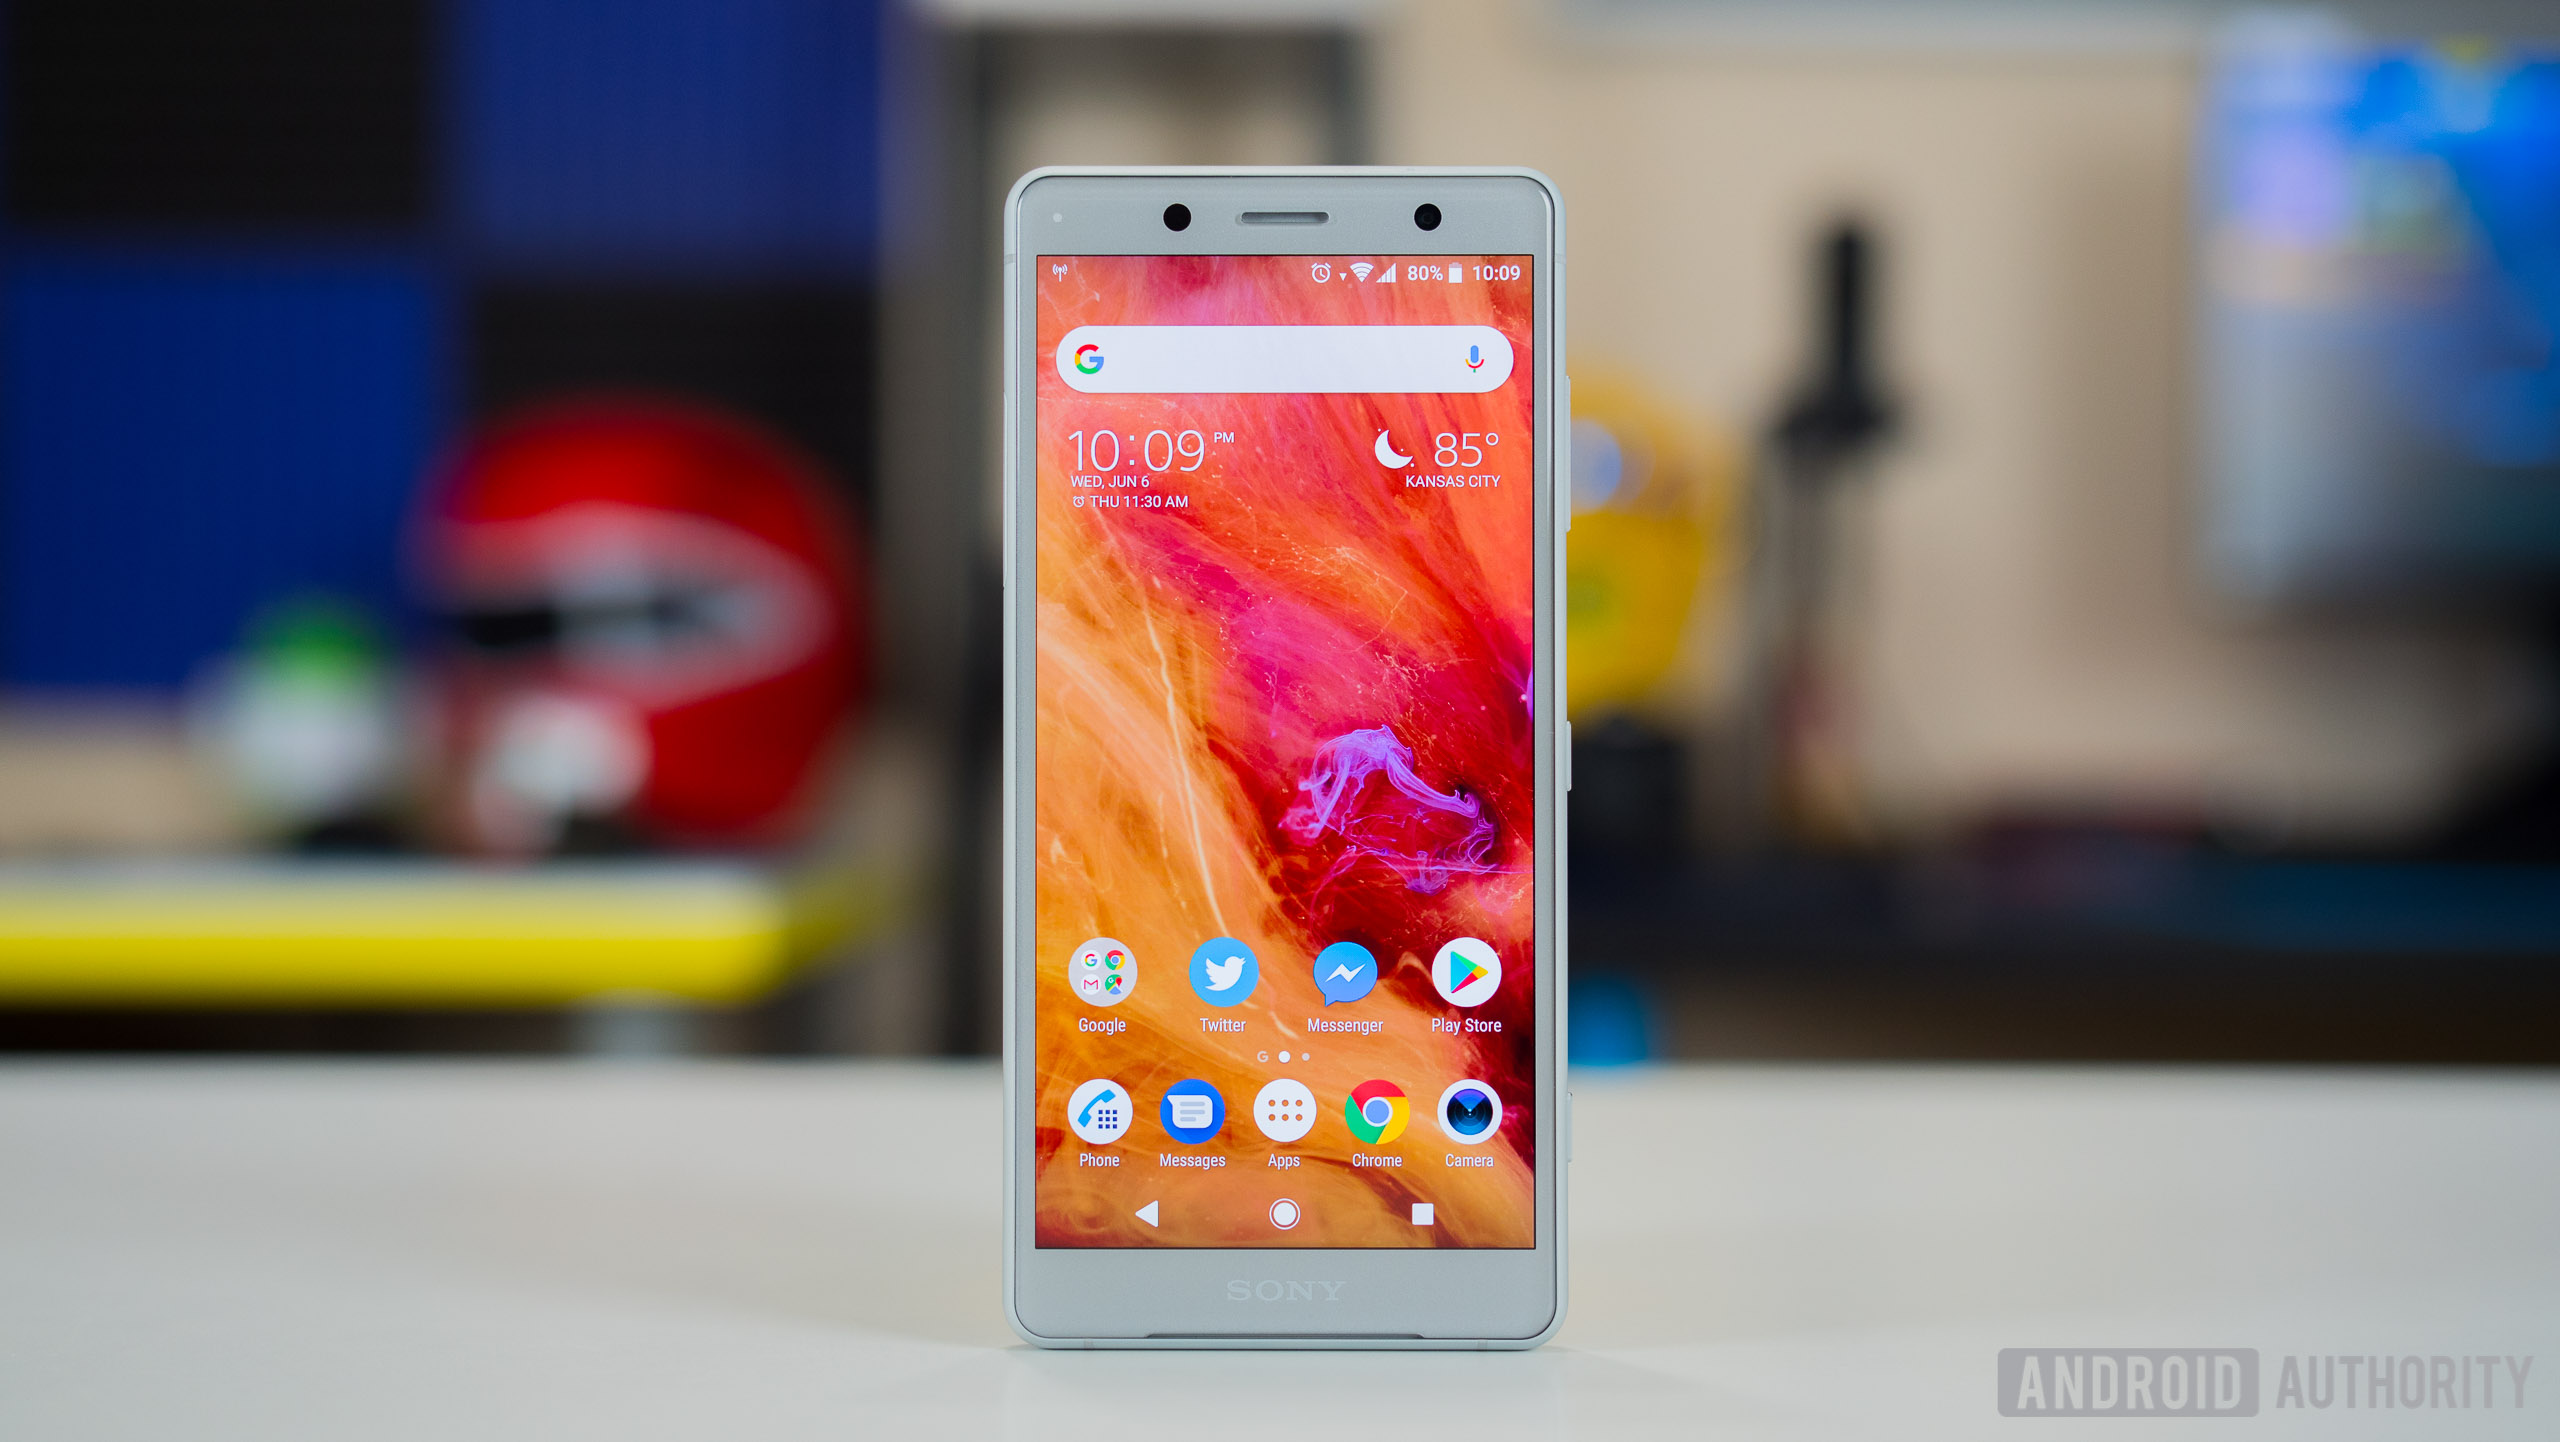 Tomat shampoo arve Sony Xperia XZ2 Compact Review - Android Authority